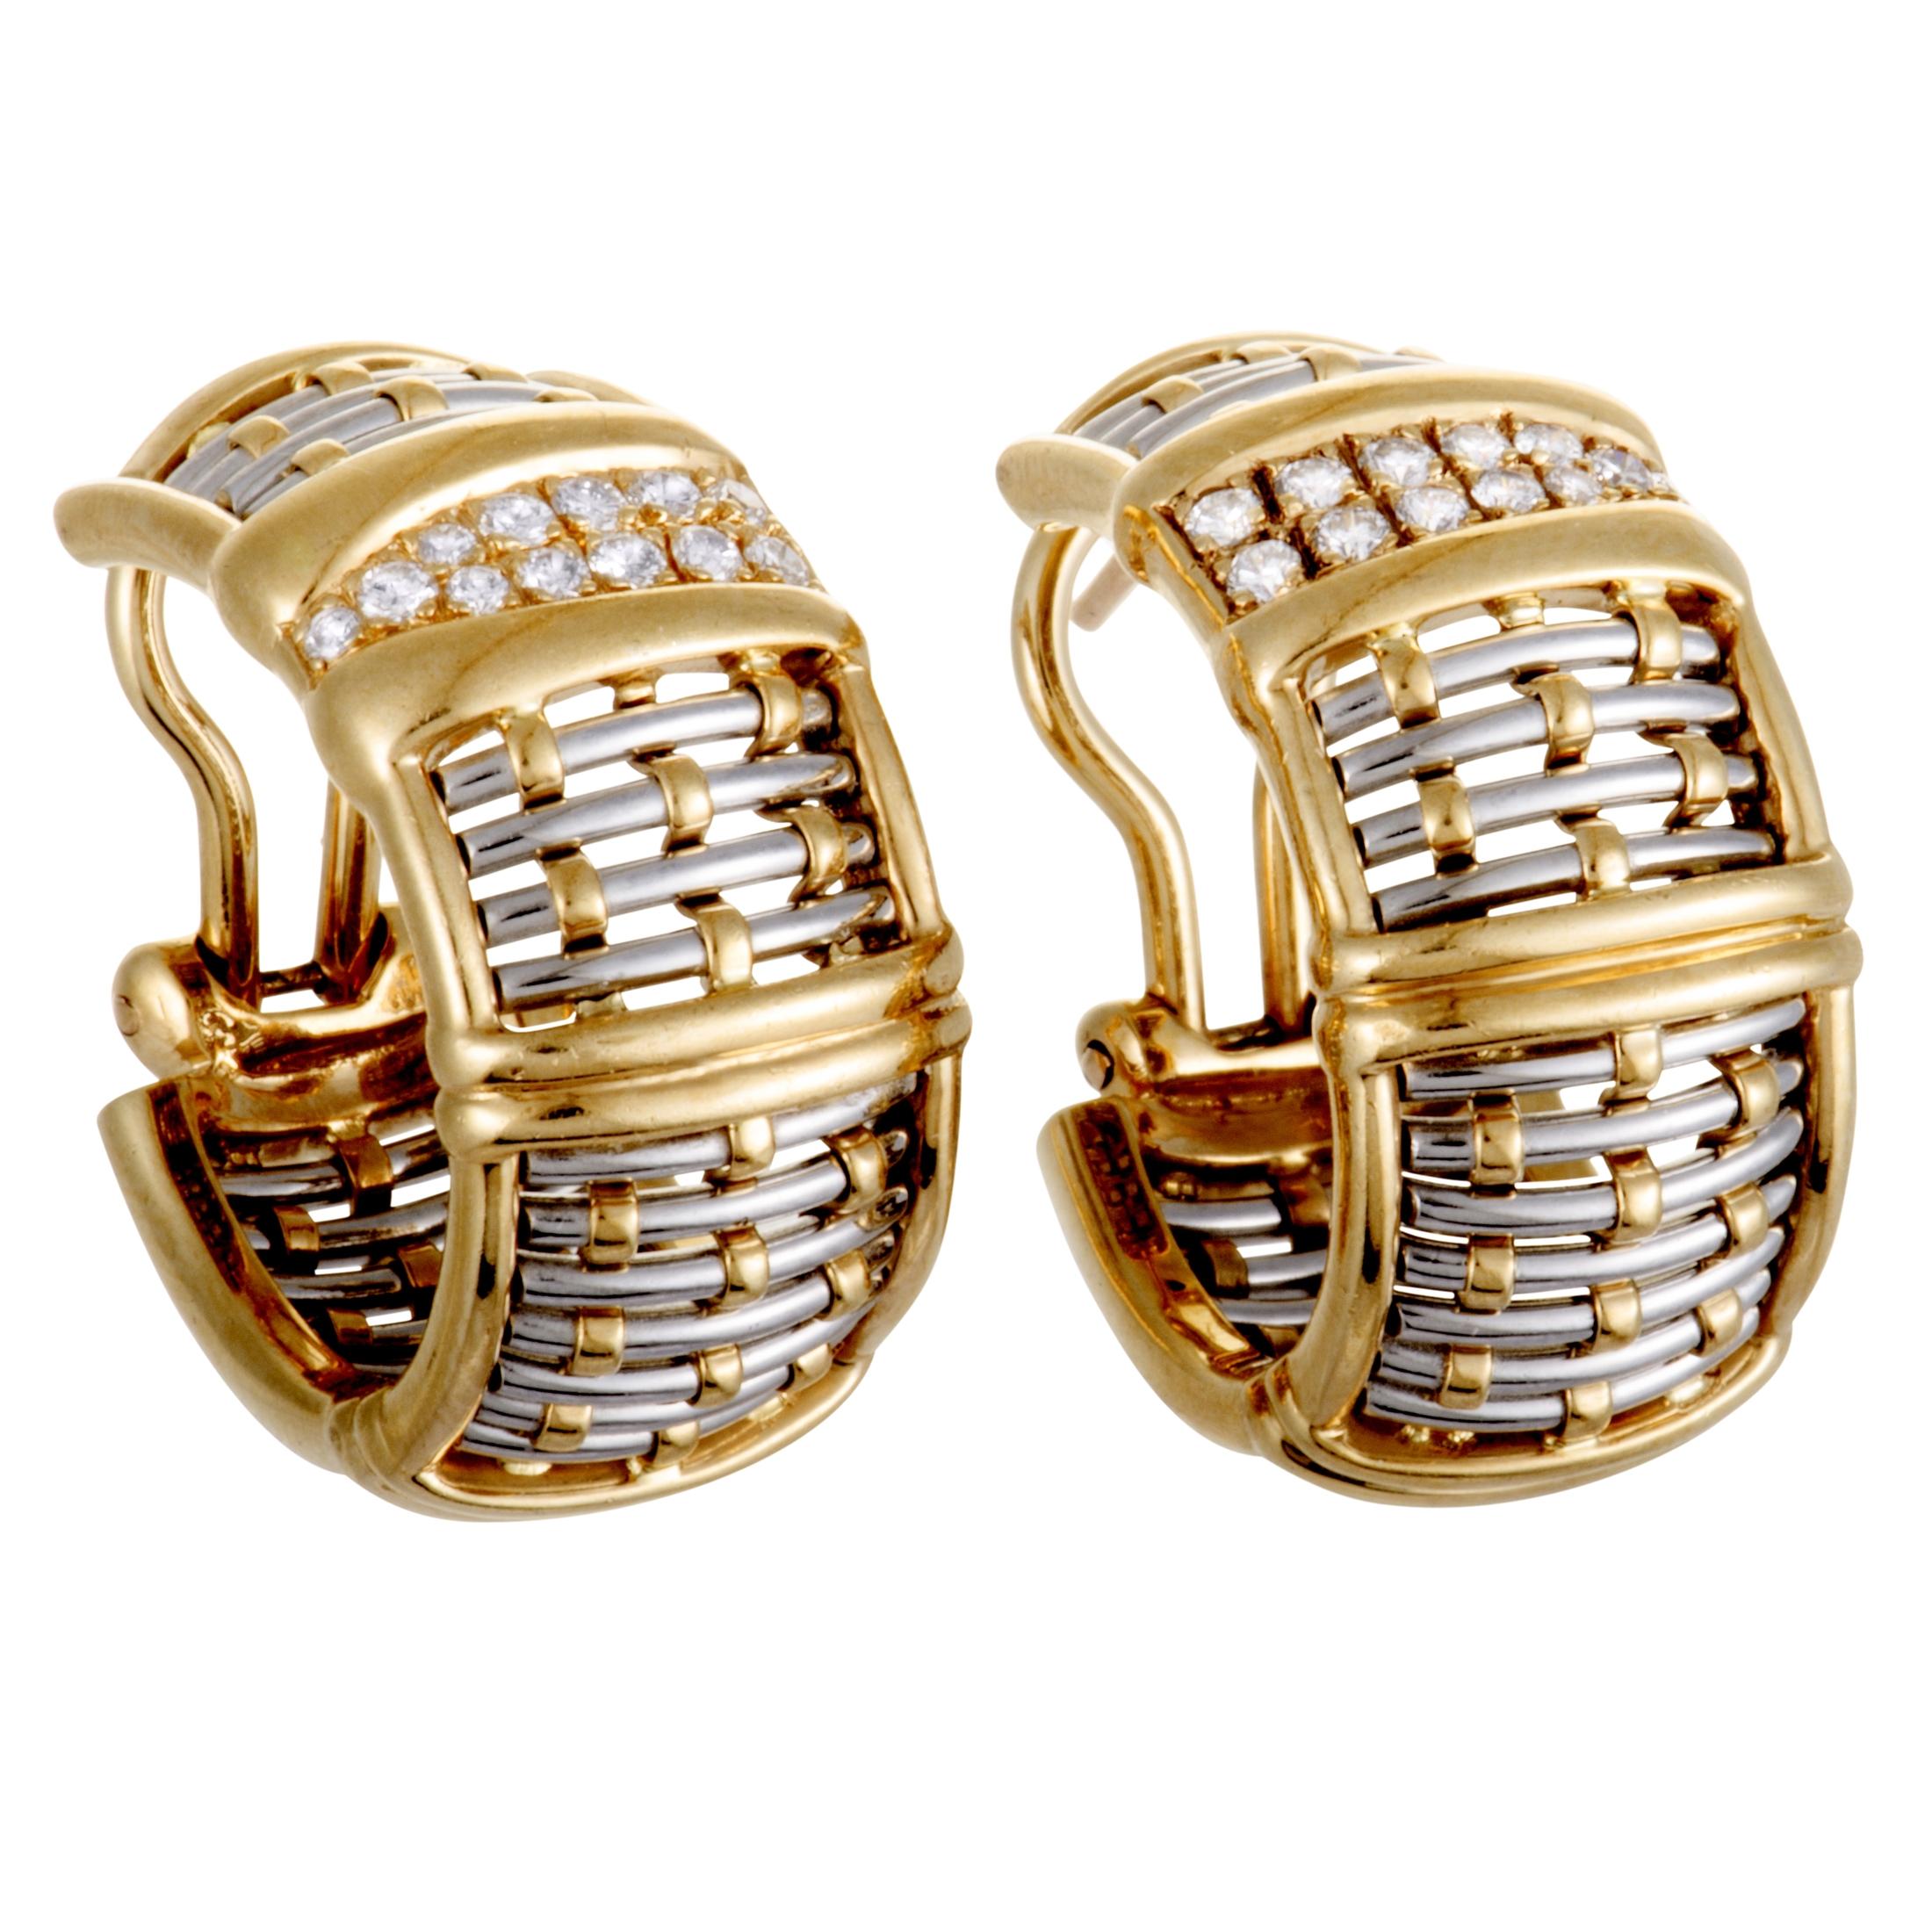 An incredibly fashionable design is beautifully presented in 18K yellow and 18K white gold in these extraordinary earrings created by Cartier. The pair is decorated with colorless (grade F) diamonds of VS1 clarity that weigh 0.38 carats in total.